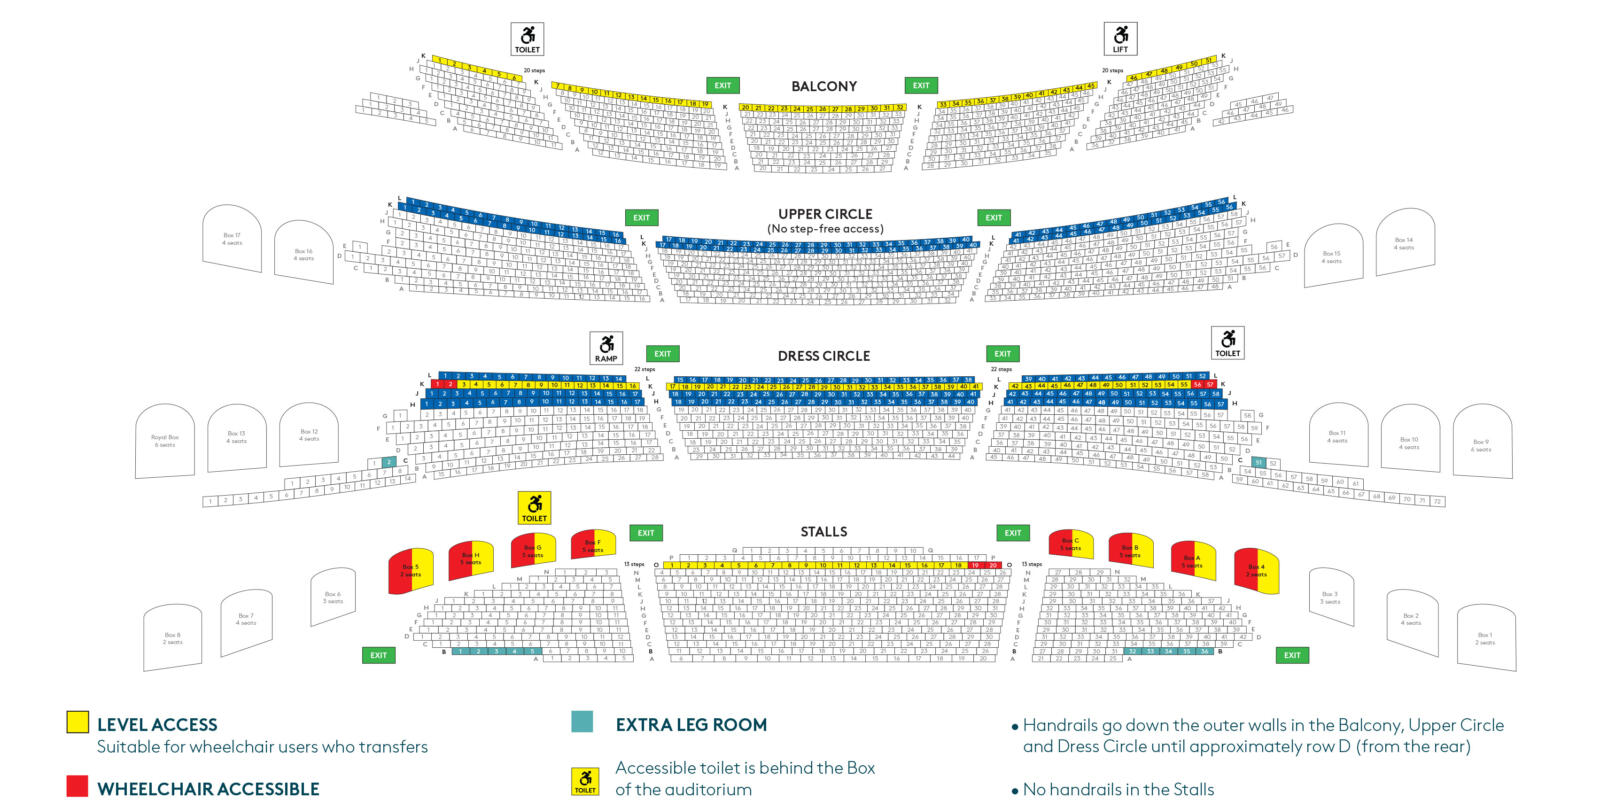 Seating plan for London Coliseum including accessibility guide